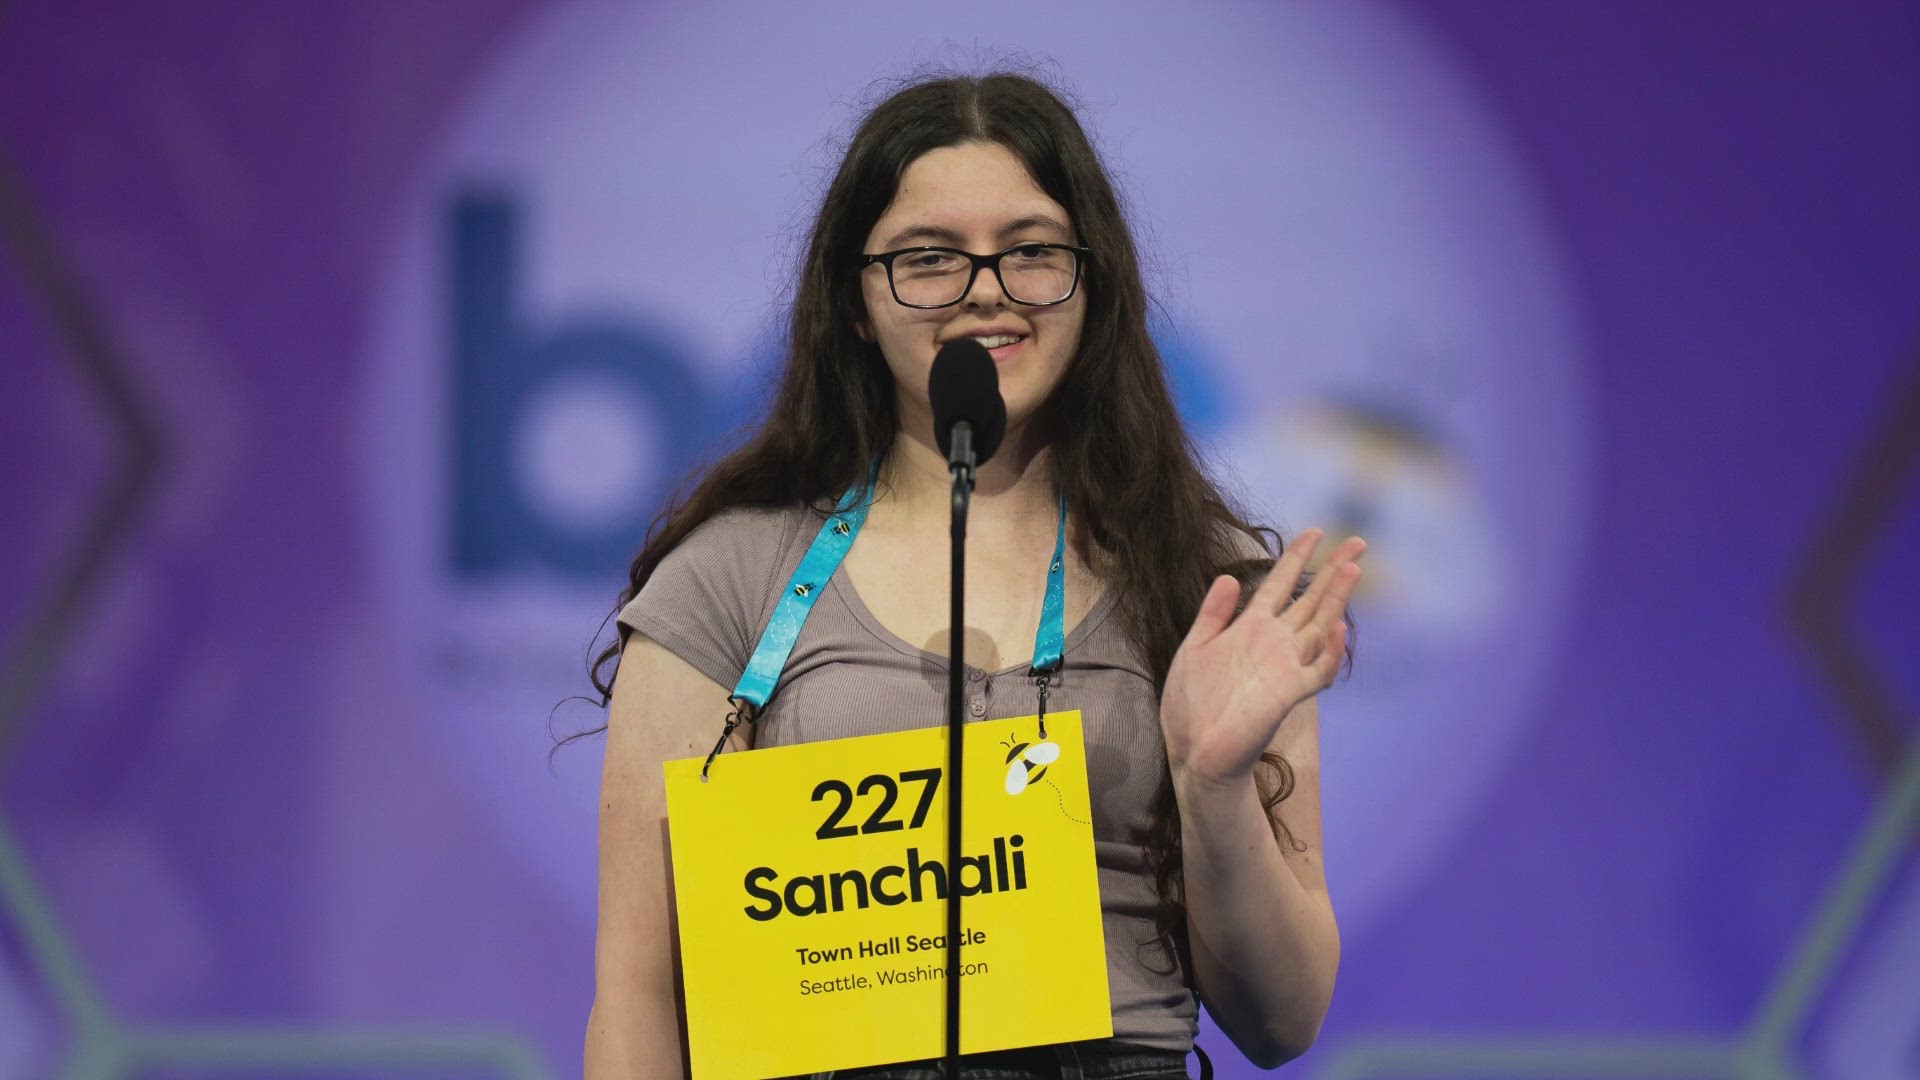 Sanchali Bohacek made it to the quarter finals of the Scripps National Spelling Bee.